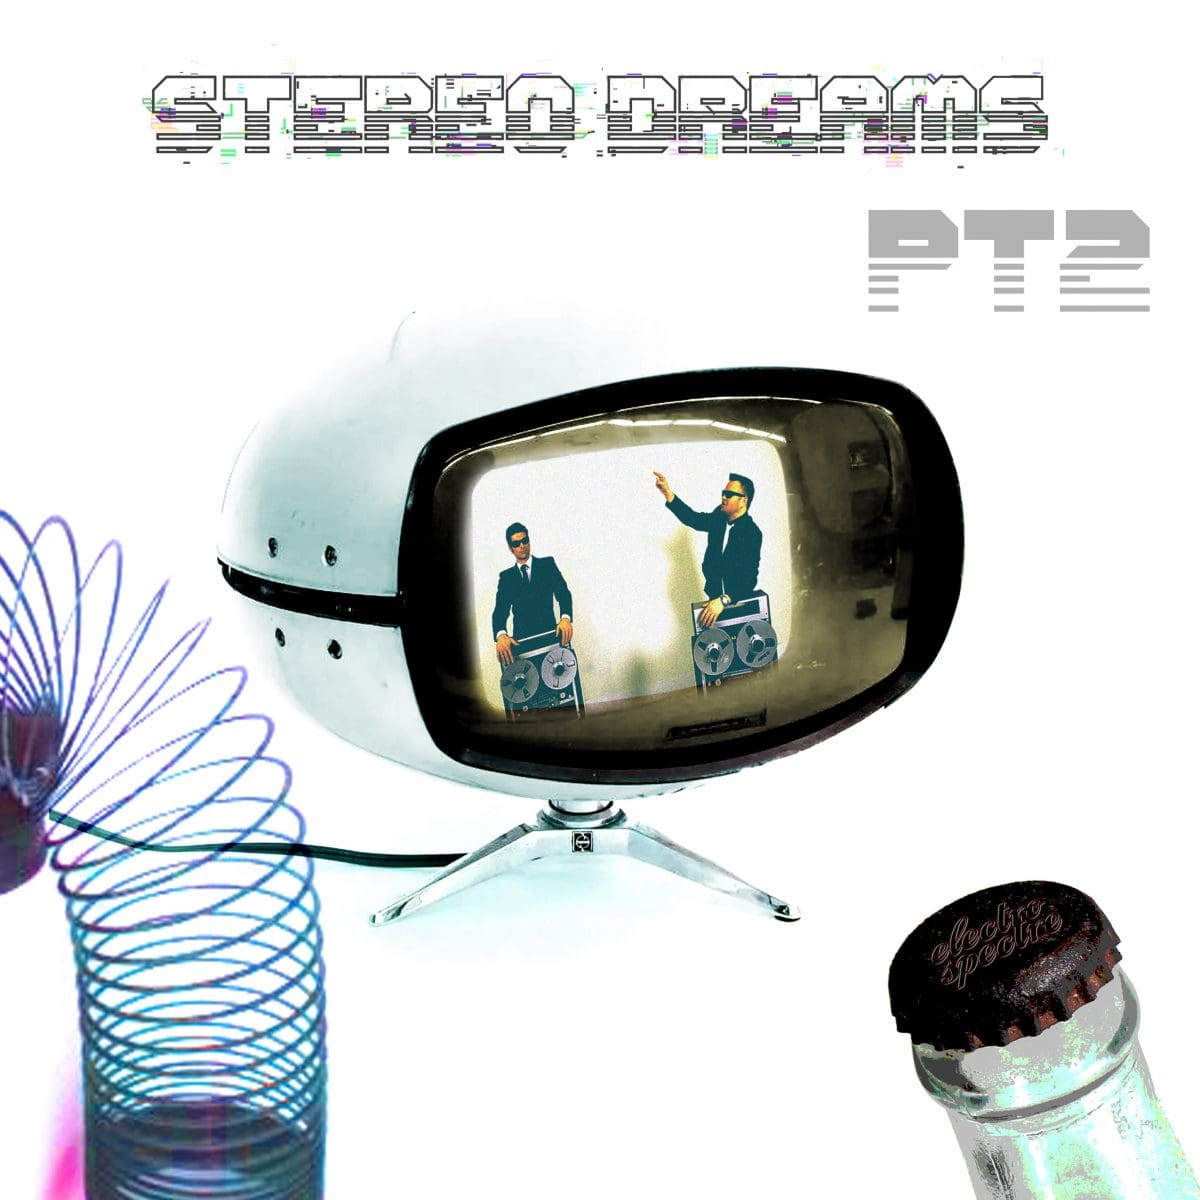 Electro Spectre Releases 'stereo Dreams Pt1', Emphasizing 'we Want to Touch Your Deep Emotions'